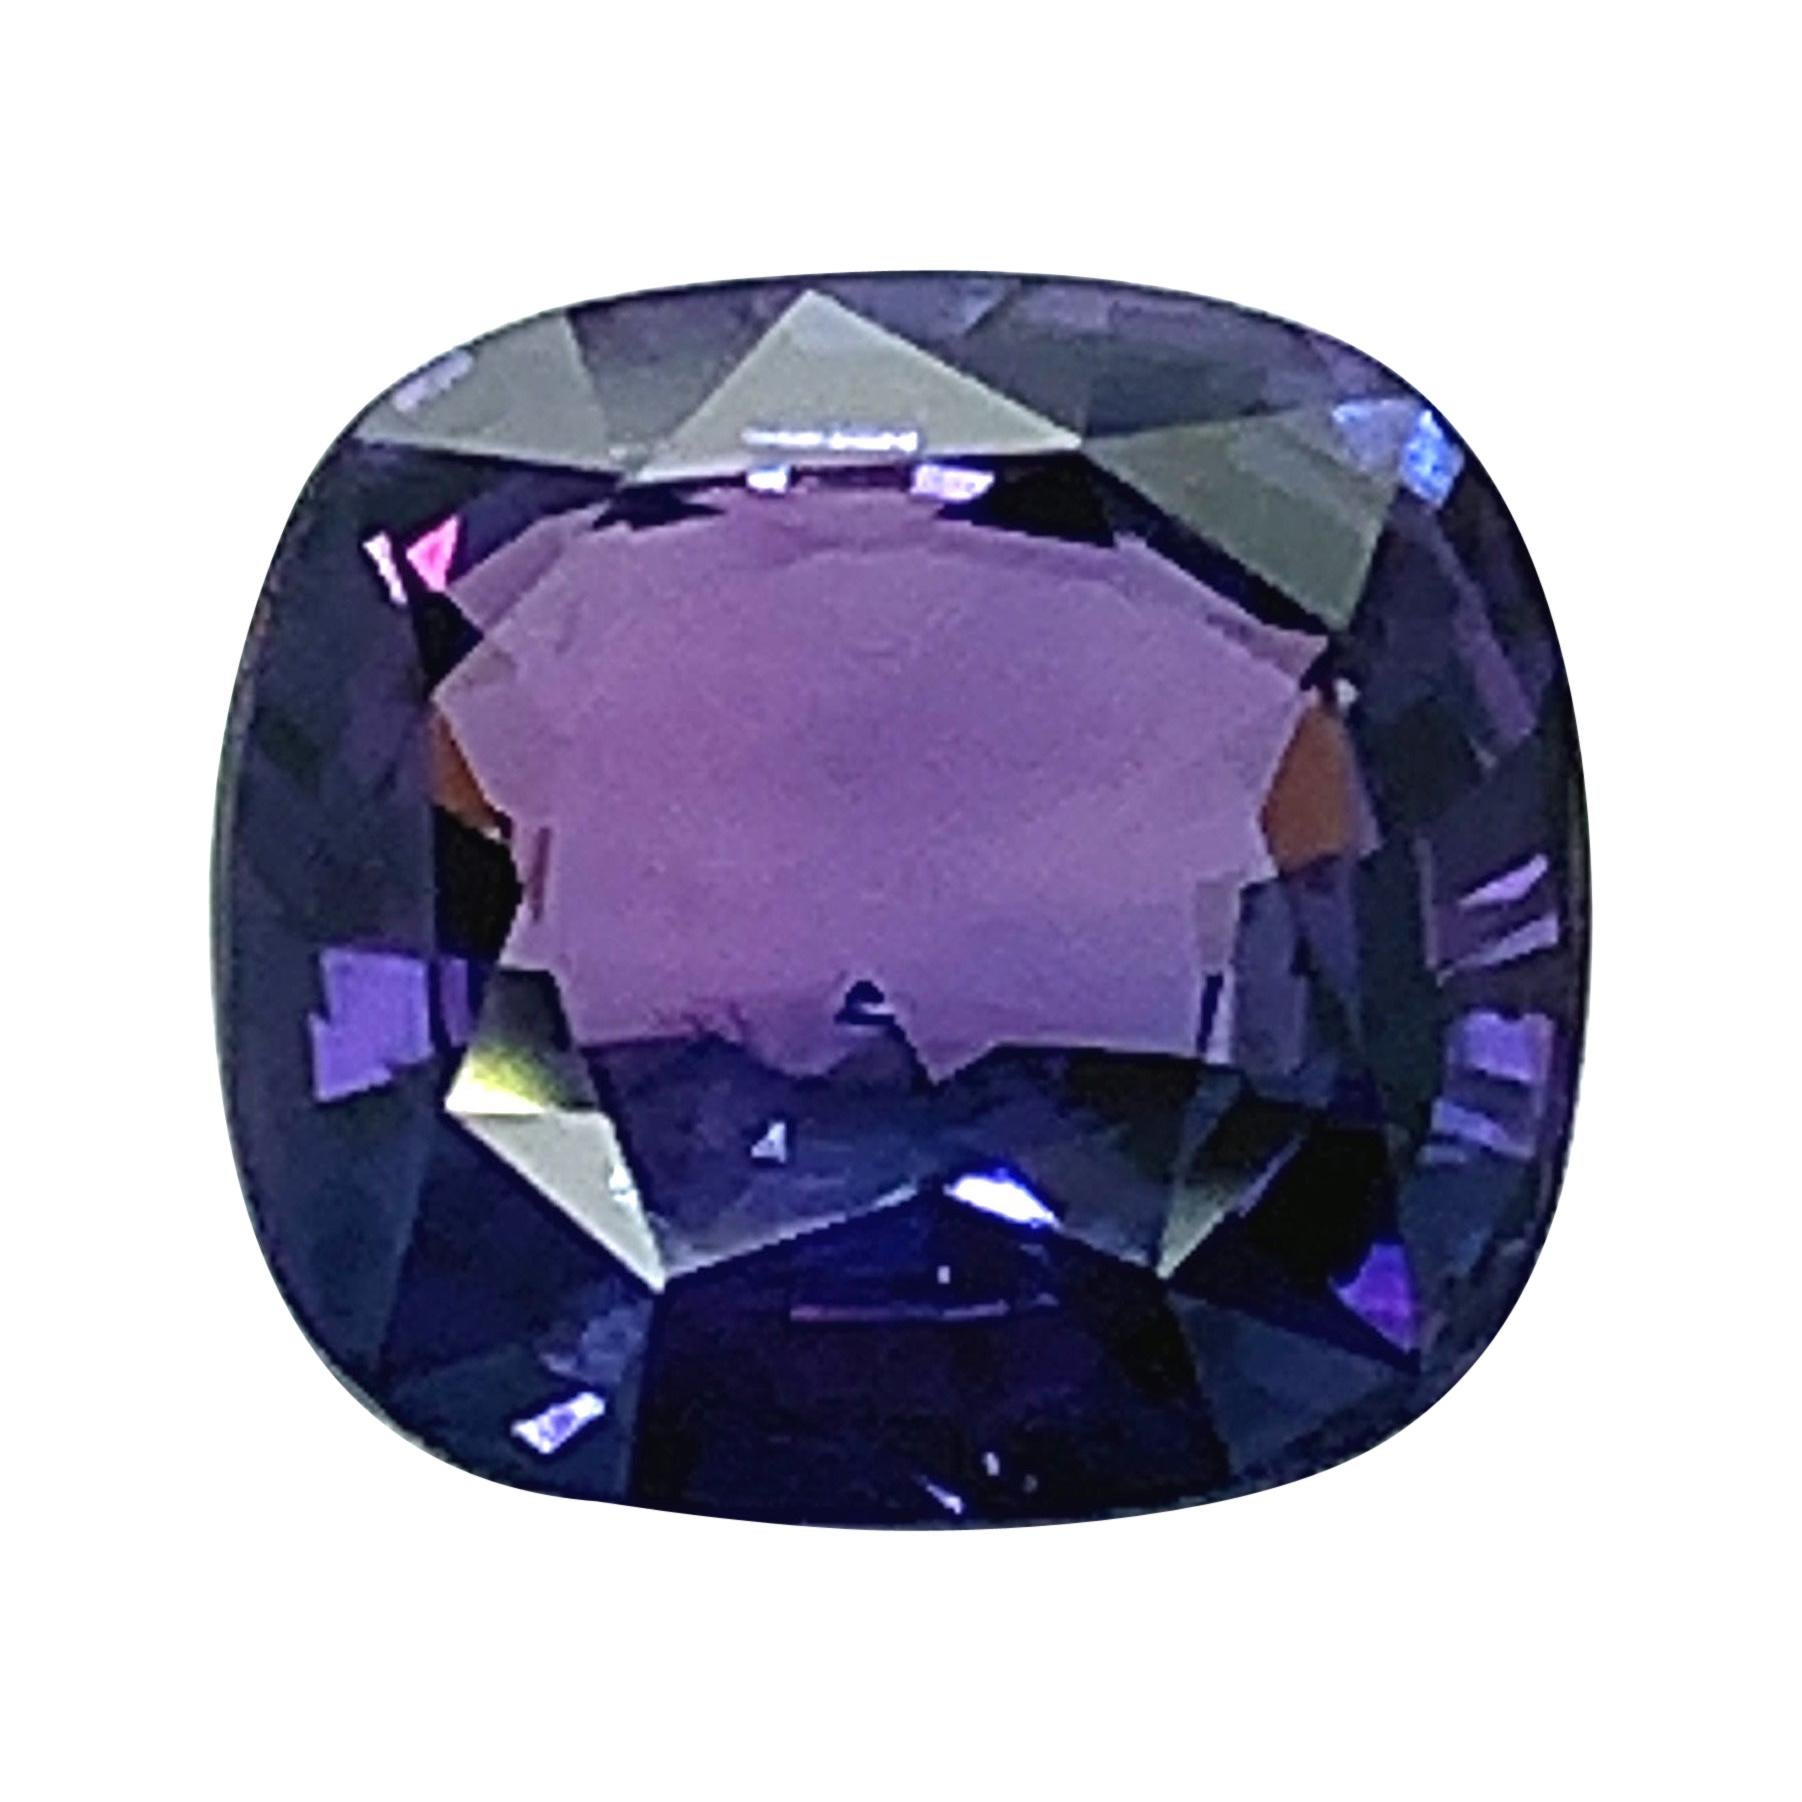 6.76 Carat Color Change Sapphire Cushion, Unset Loose Gemstone, GIA Certified